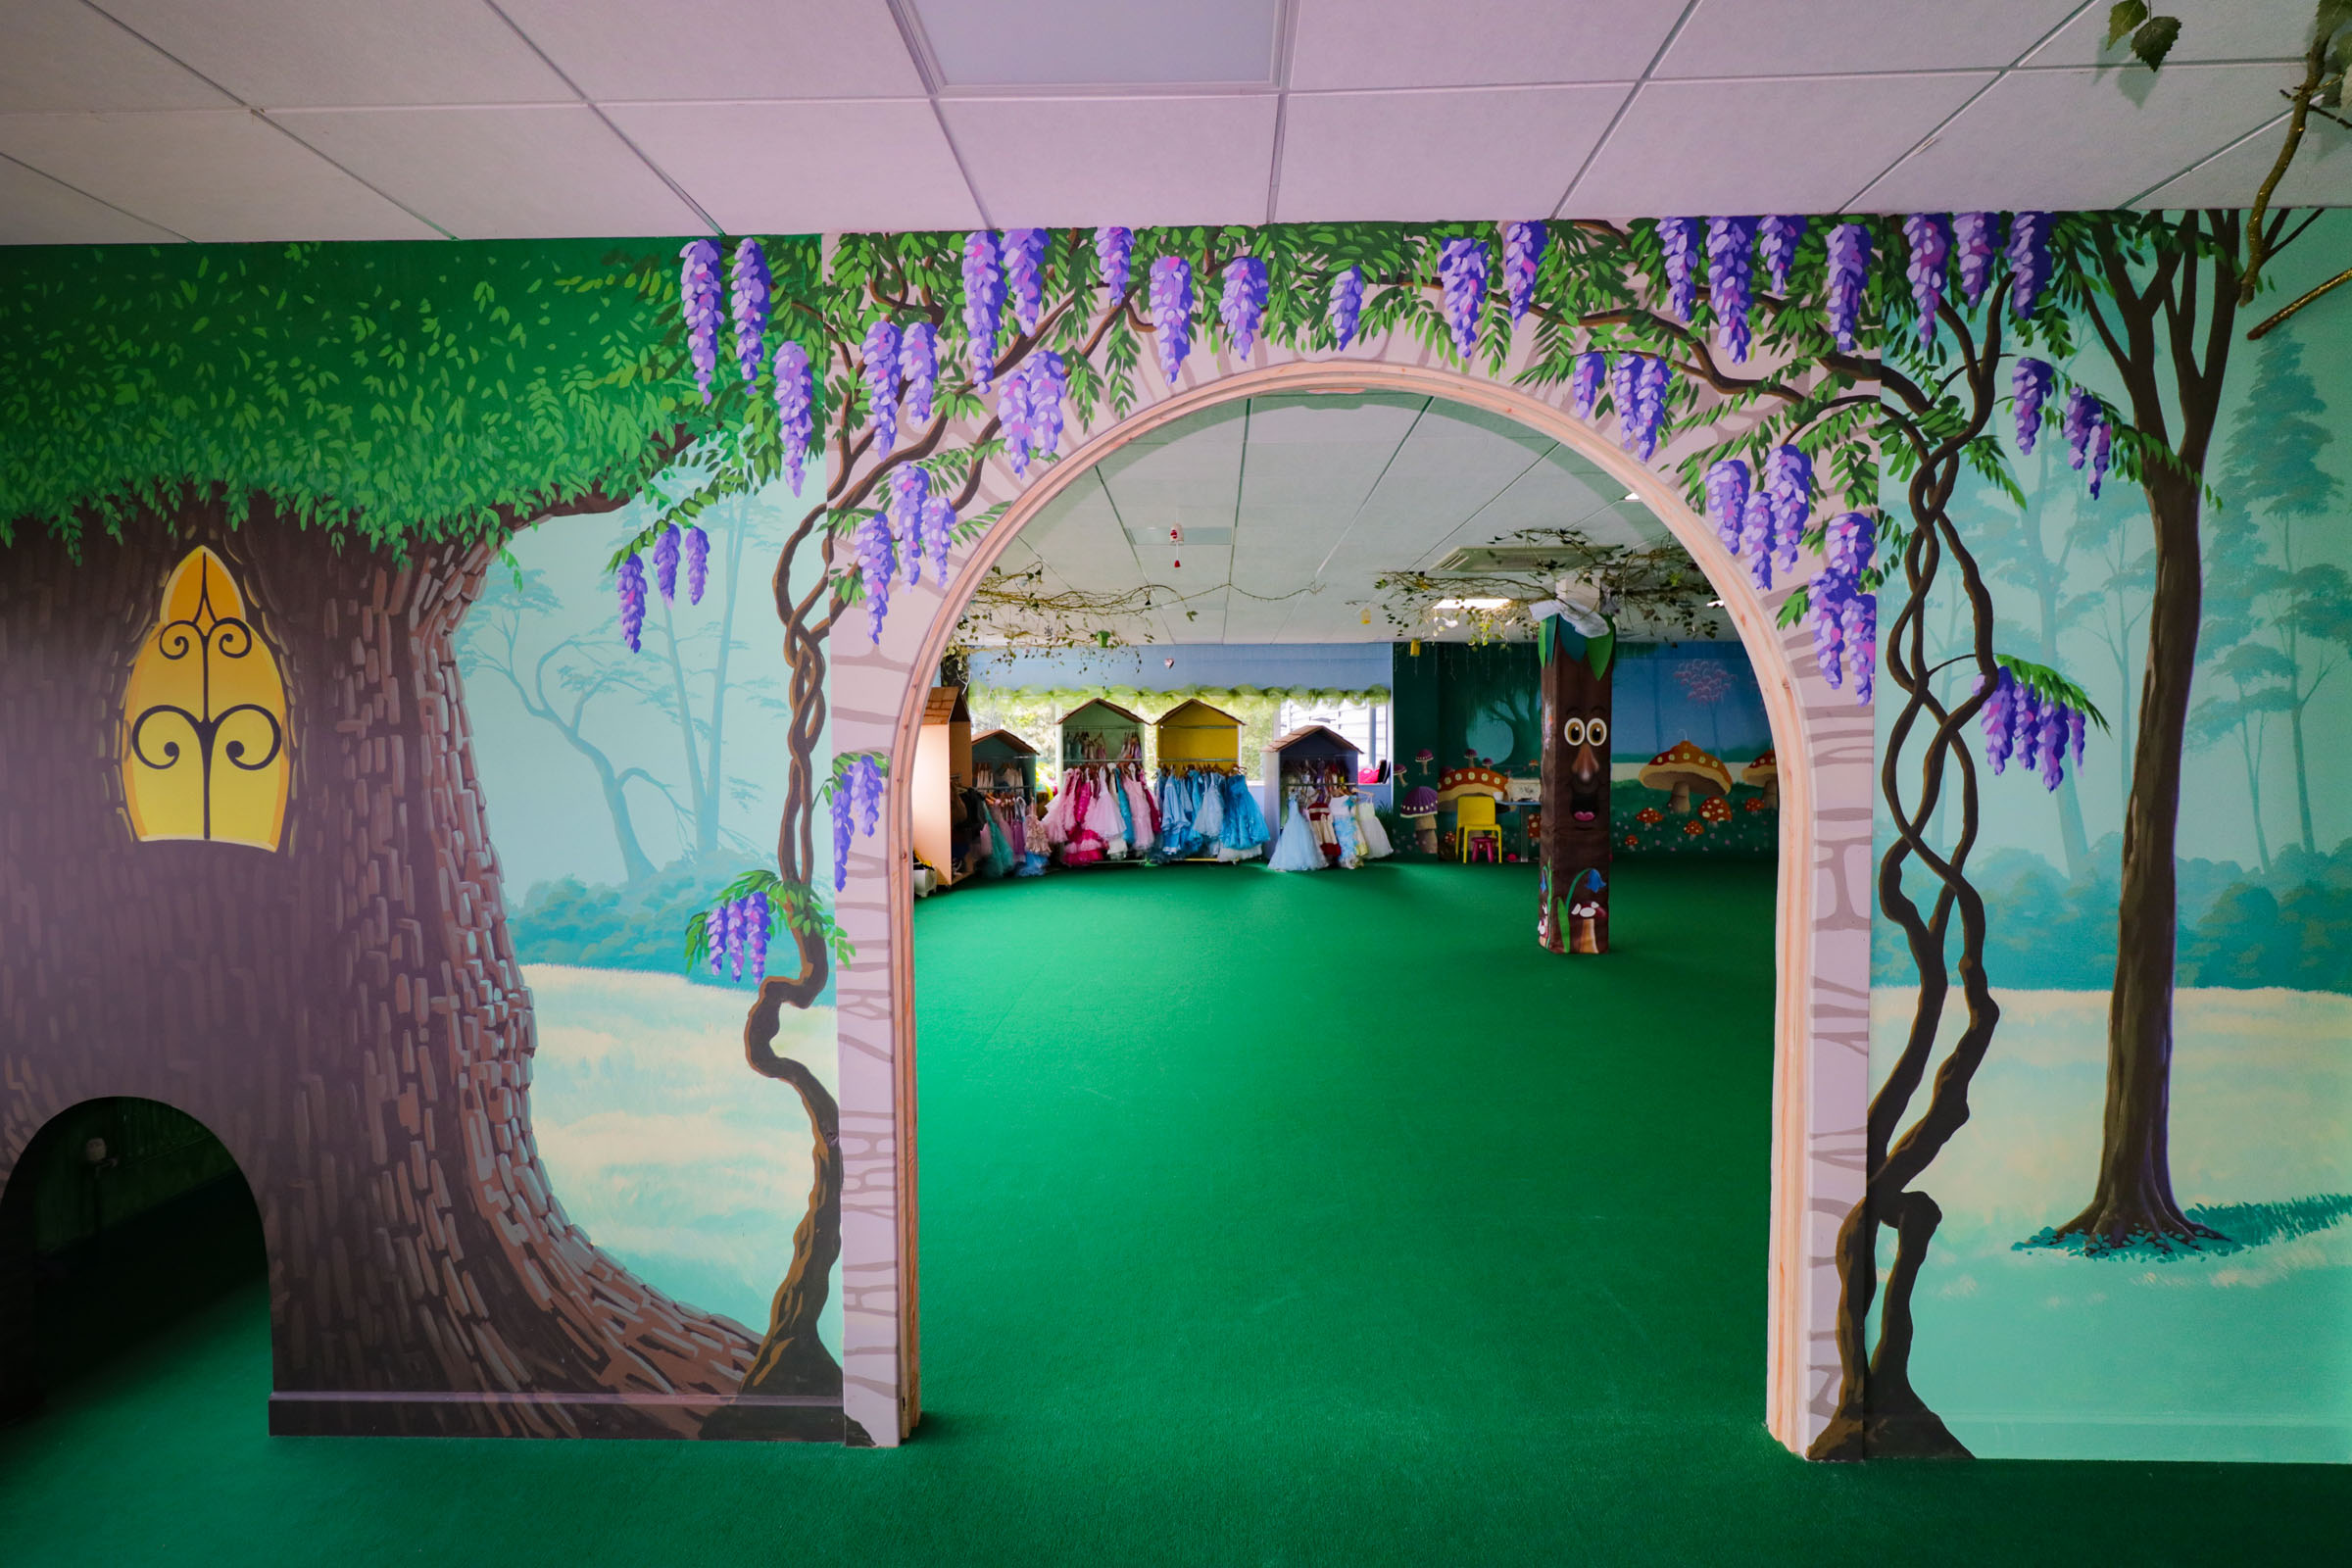 Magic Forest Party Room at the Riverside Hub, Northampton with large magical fairy tree and wisteria covered arch from the other side